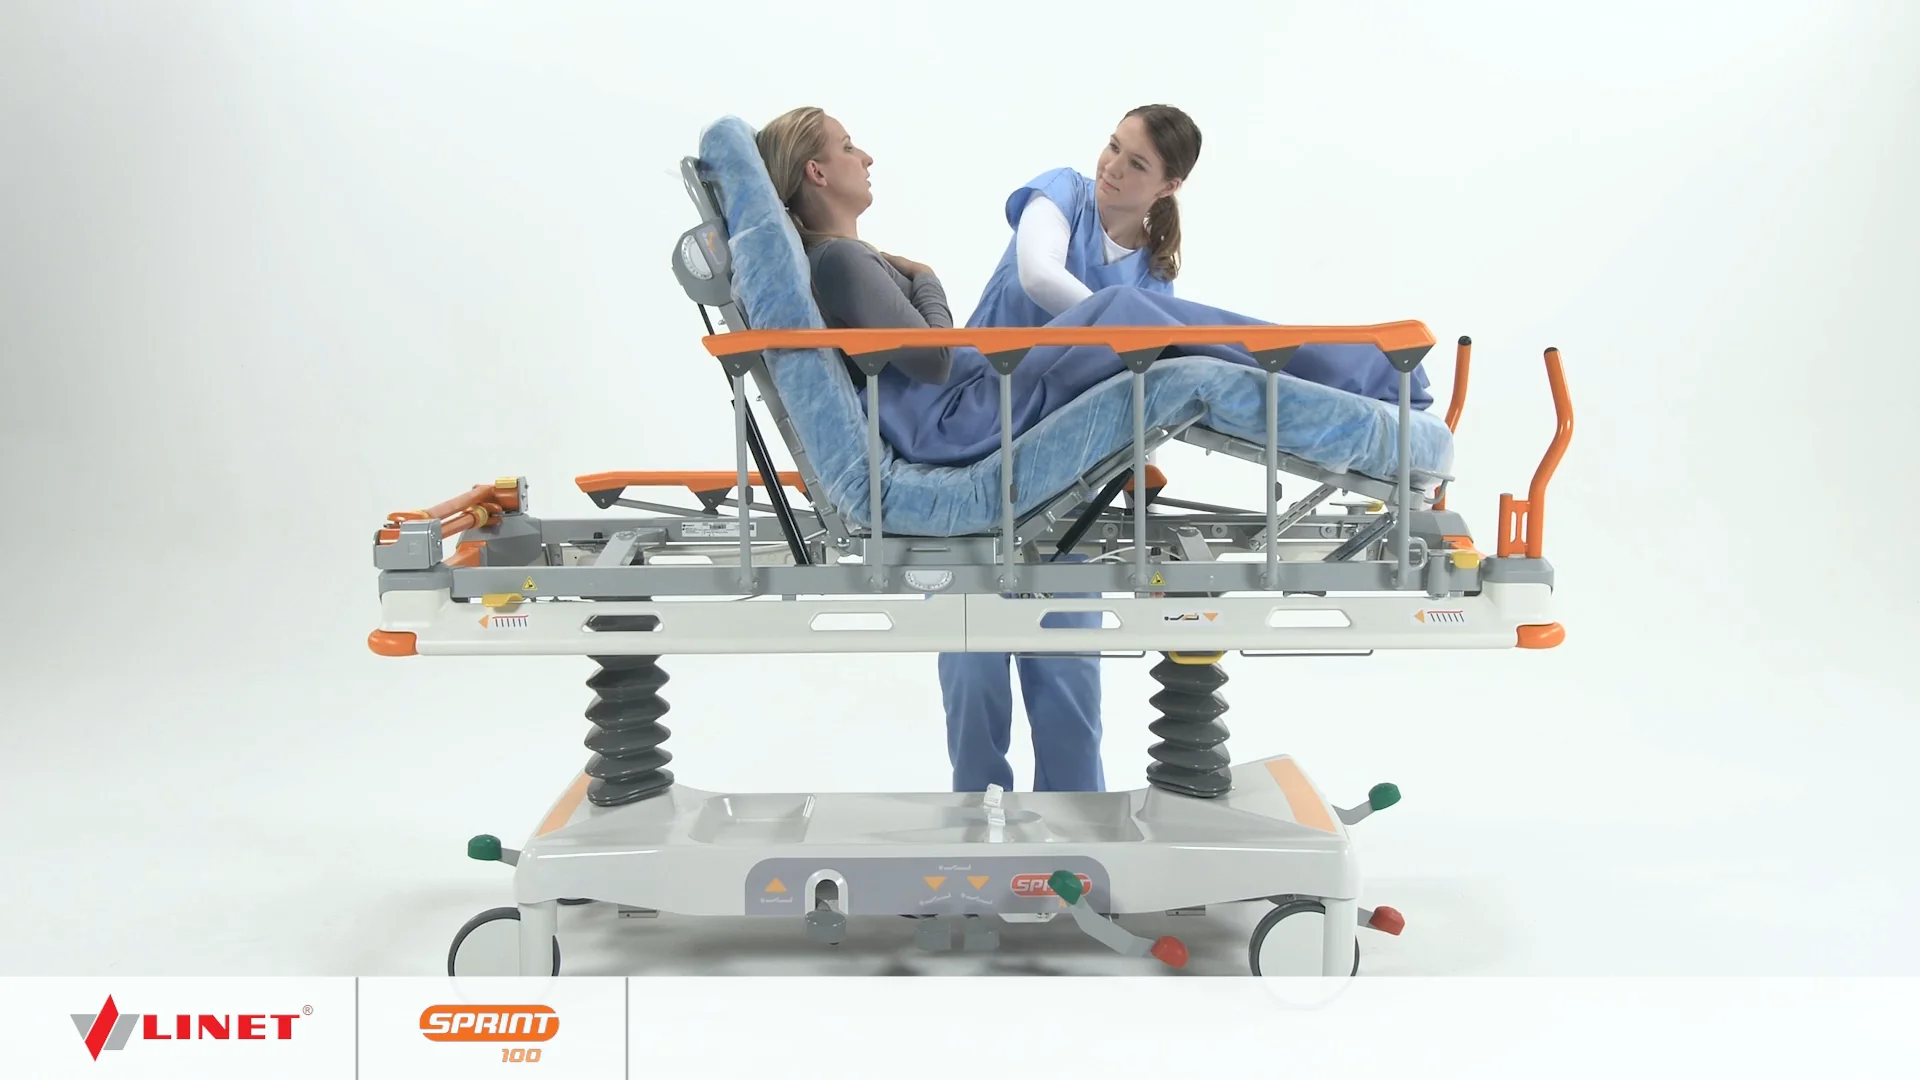 19_06_01 Scoliosis Traction Chair on Vimeo